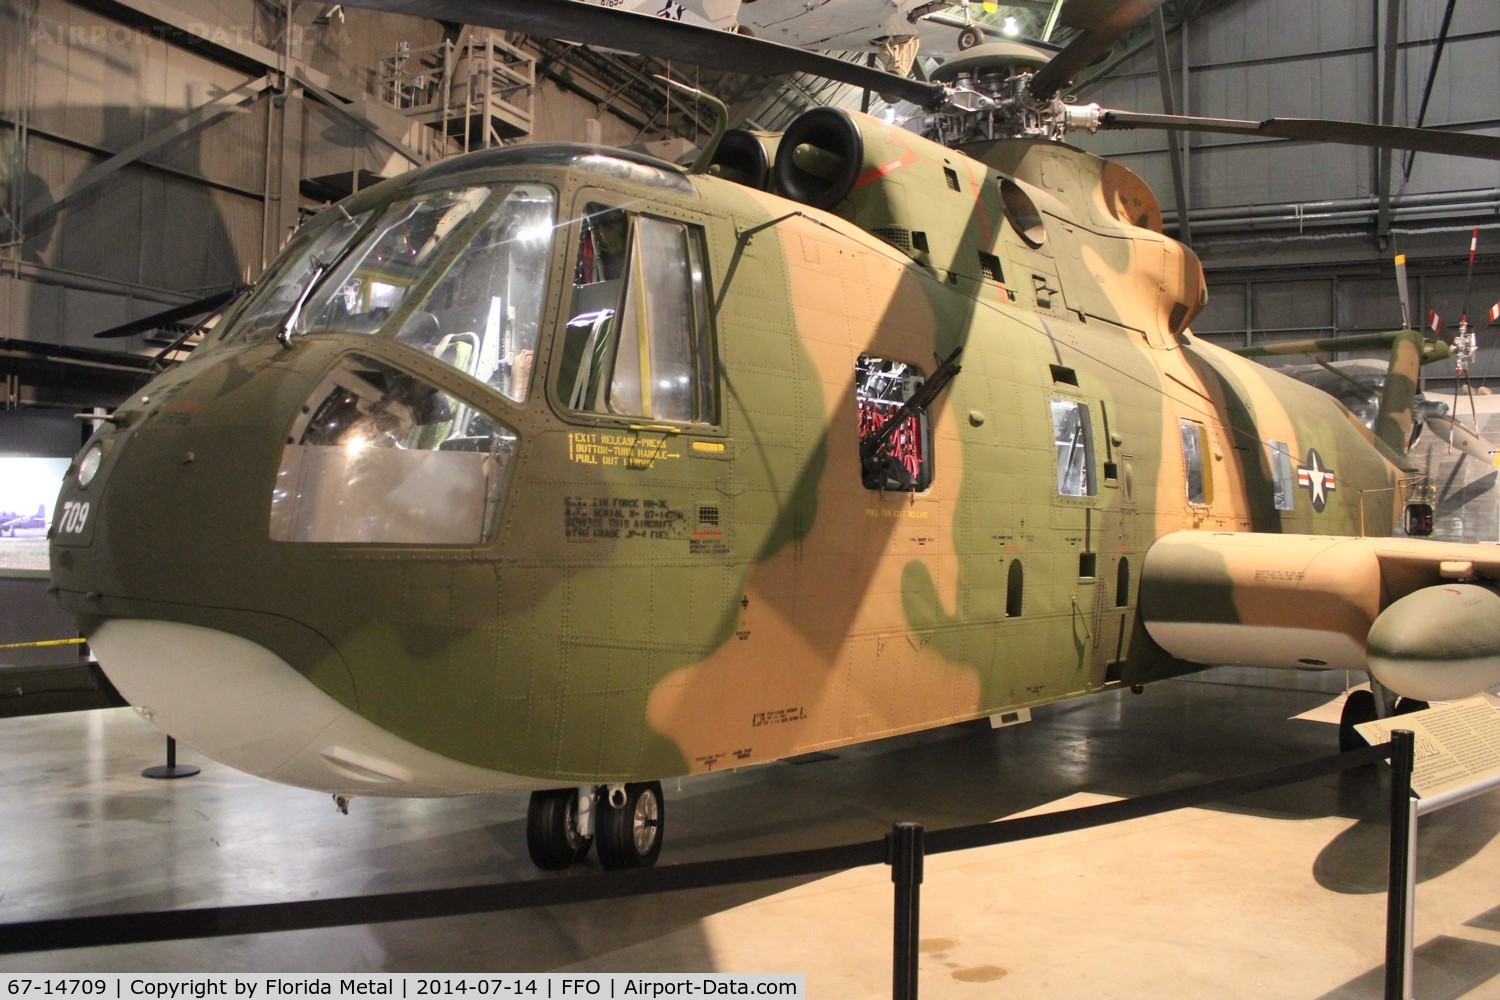 67-14709, 1967 Sikorsky HH-3E Jolly Green Giant C/N 61-611, HH-3E